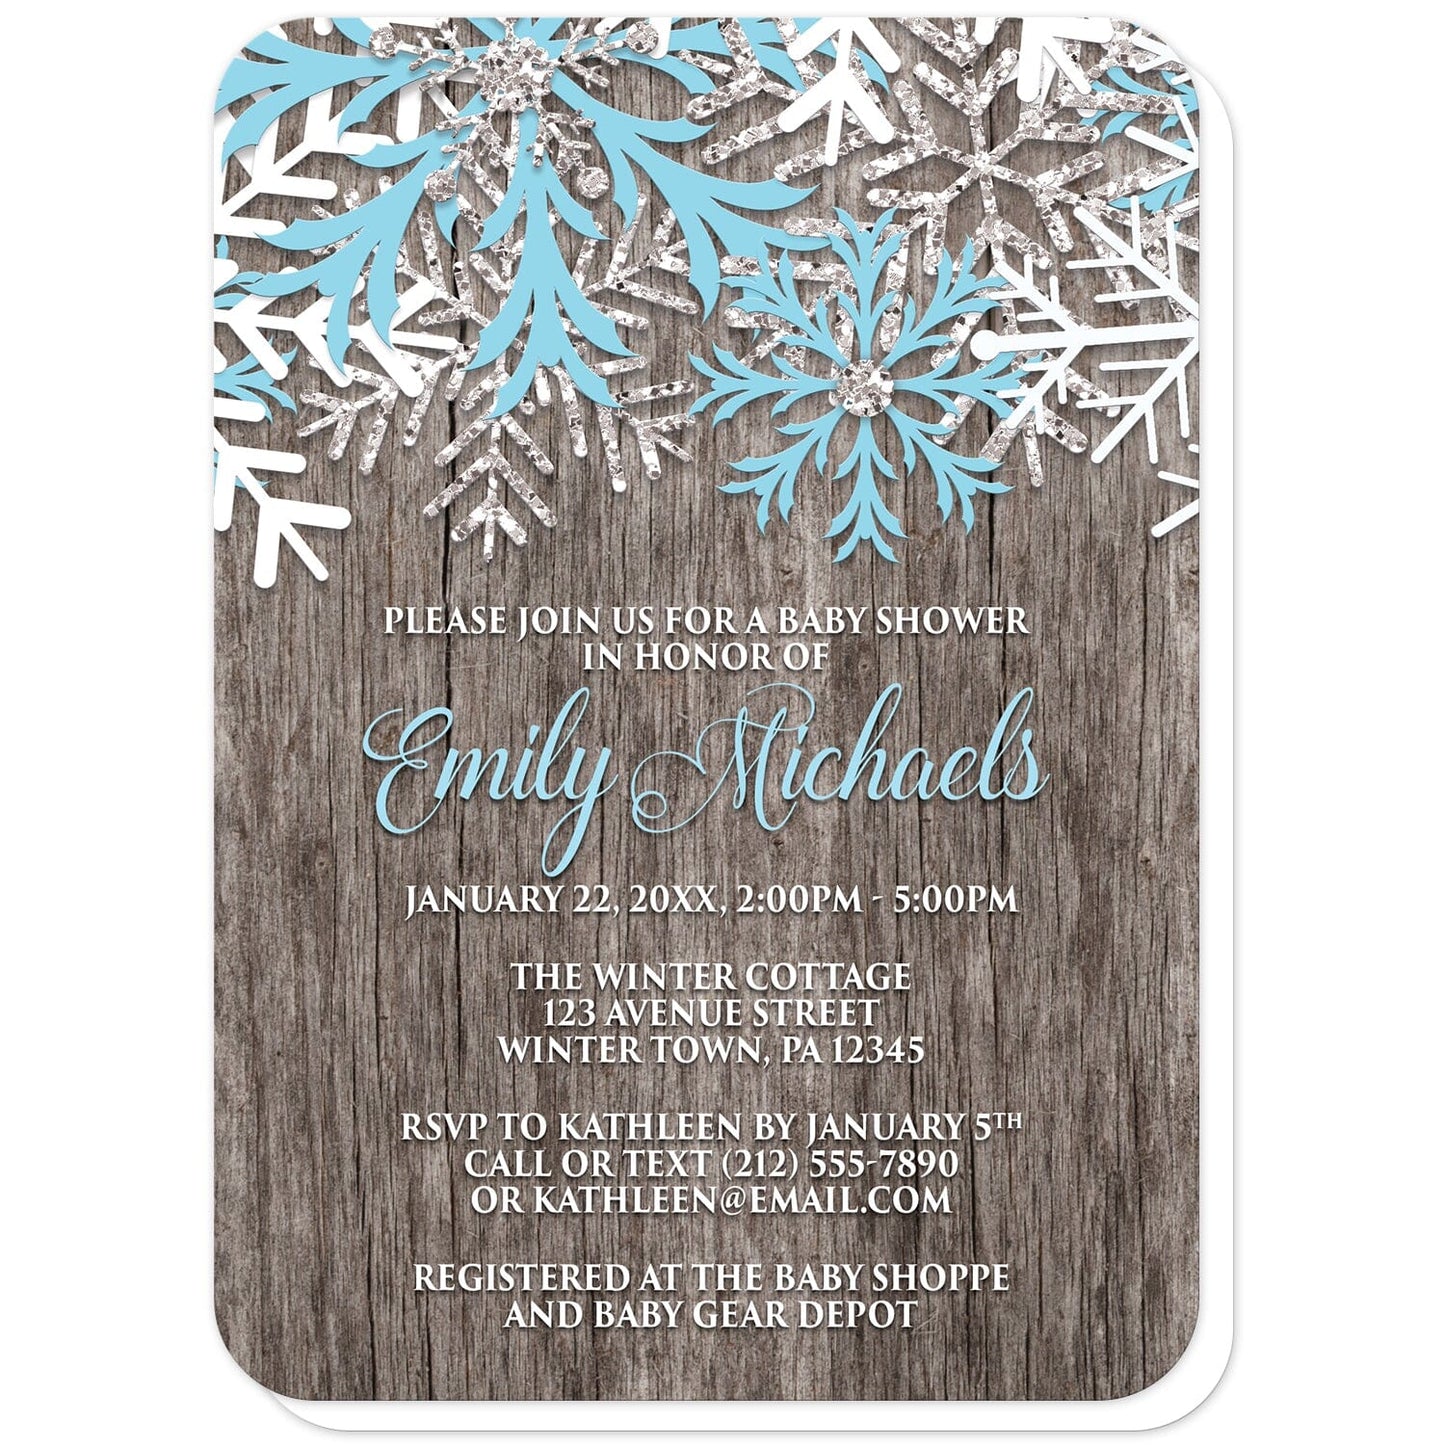 Rustic Winter Wood Blue Snowflake Baby Shower Invitations (with rounded corners) at Artistically Invited. Country-inspired rustic winter wood blue snowflake baby shower invitations designed with light blue, white, and silver-colored glitter-illustrated snowflakes along the top over a rustic wood pattern illustration. Your personalized baby shower celebration details are custom printed in light blue and white over the wood background below the snowflakes.